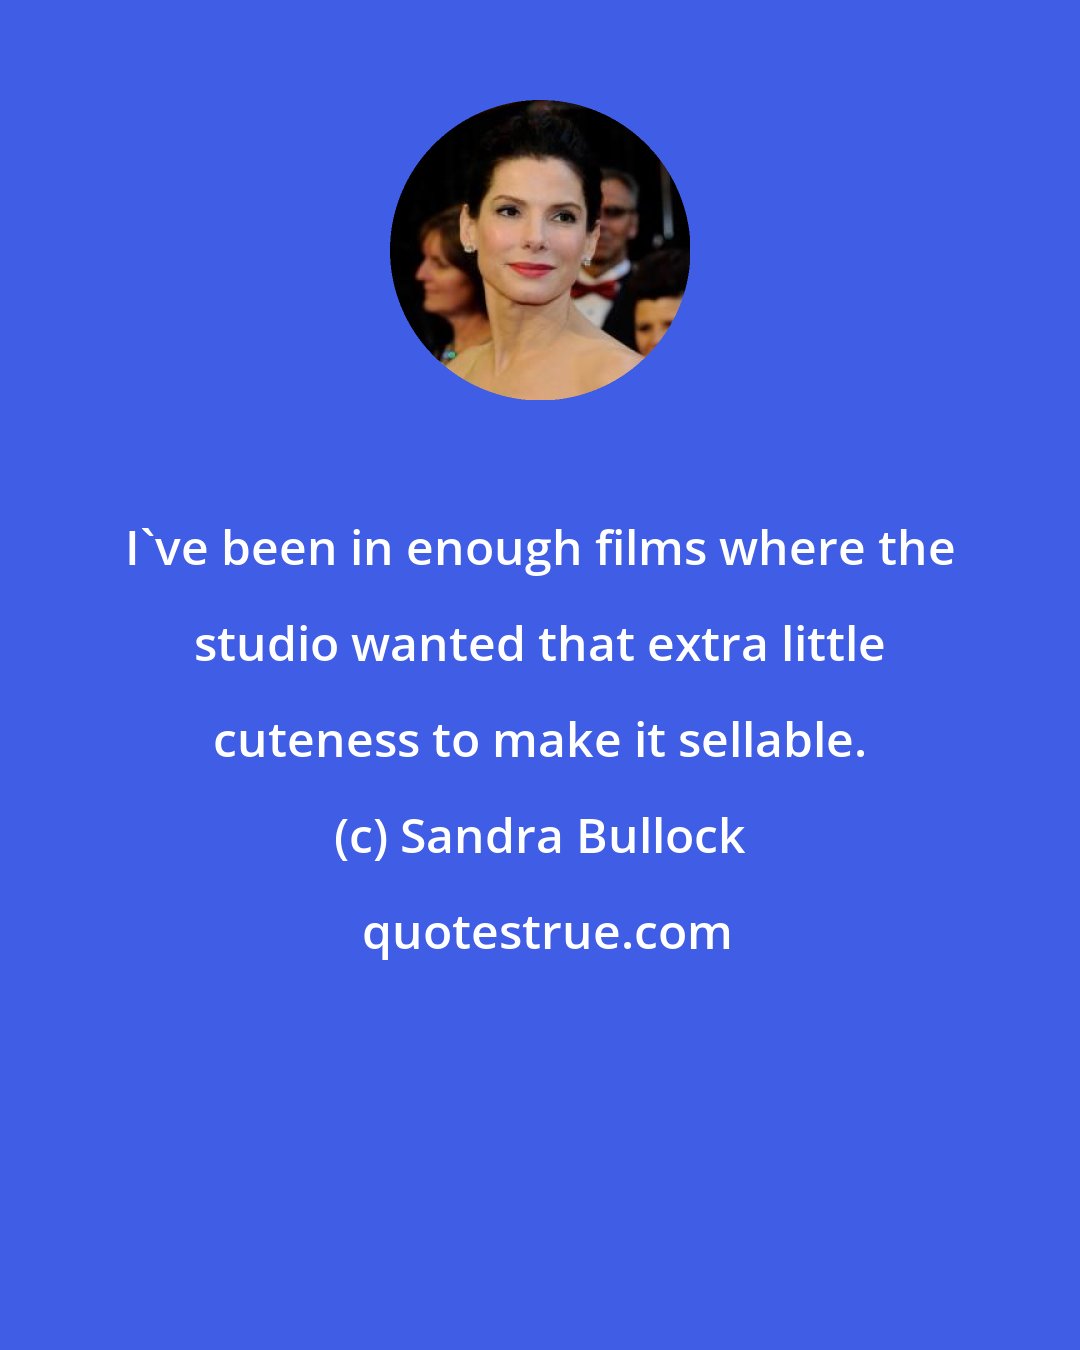 Sandra Bullock: I've been in enough films where the studio wanted that extra little cuteness to make it sellable.